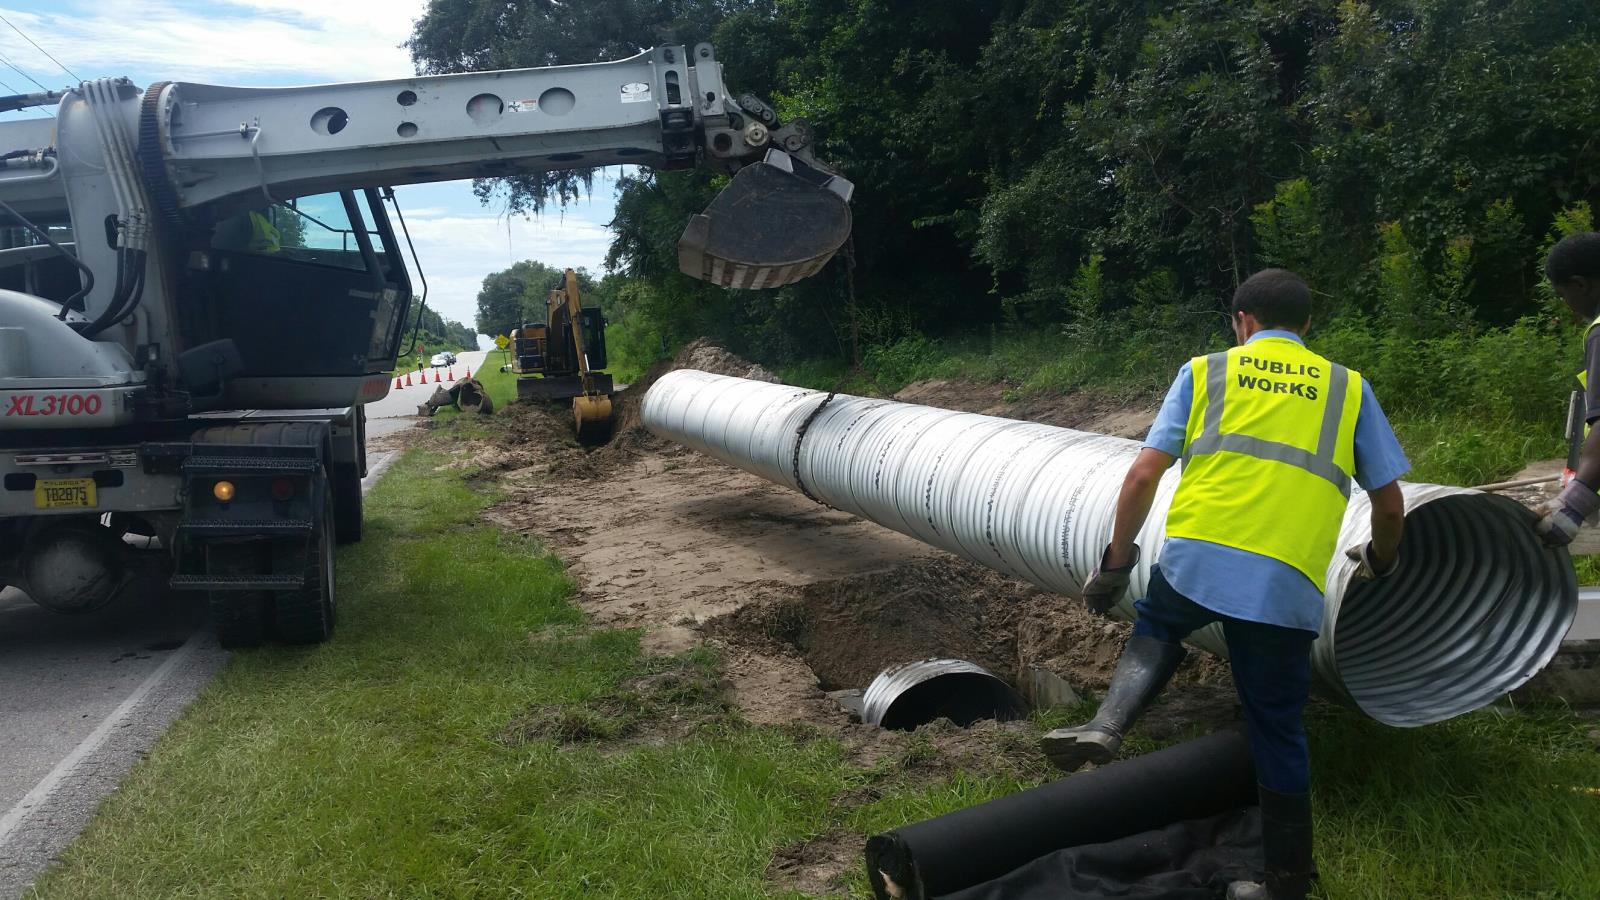 Public works installing new drainage pipe on the side of the road